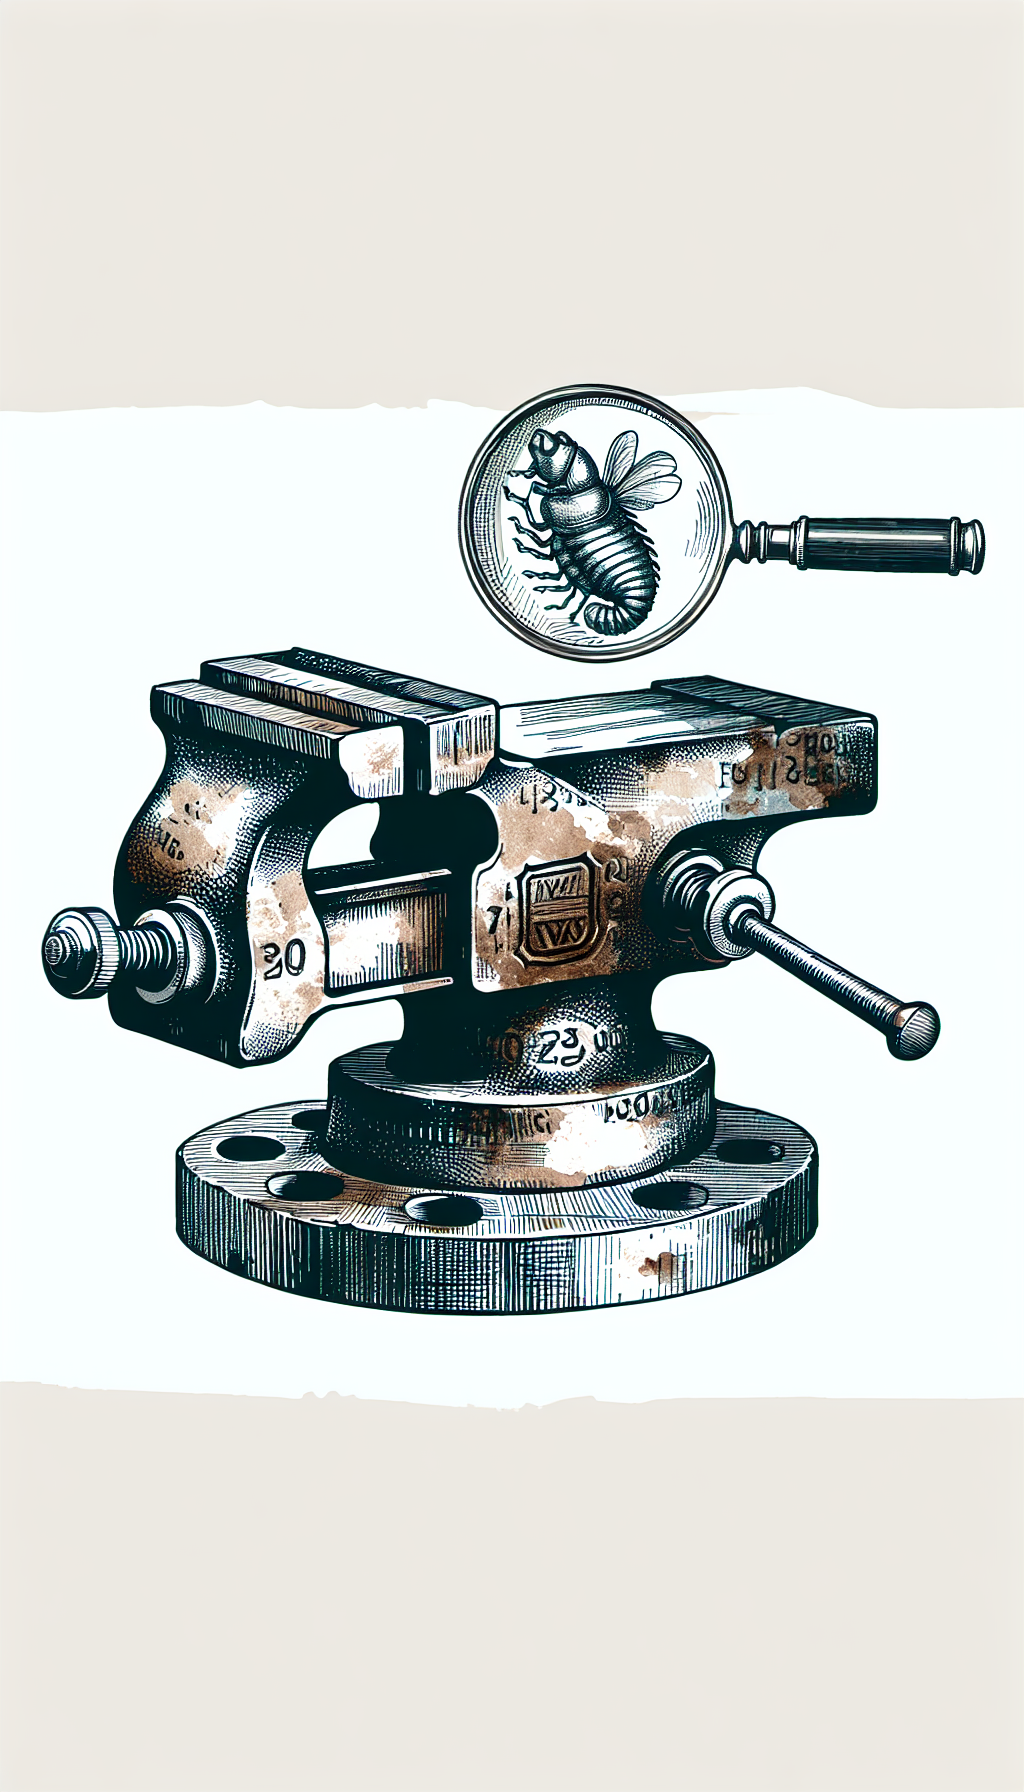 An illustration depicts an ancient vise, its rugged surface etched with the ghostly patina of age. Magnifying glass hover above, revealing decipherable manufacturer's stamps and year markings. The juxtaposition of sketched linework and watercolor textures emphasizes the contrast between the vise's steadfast form and its delicate historical signatures.